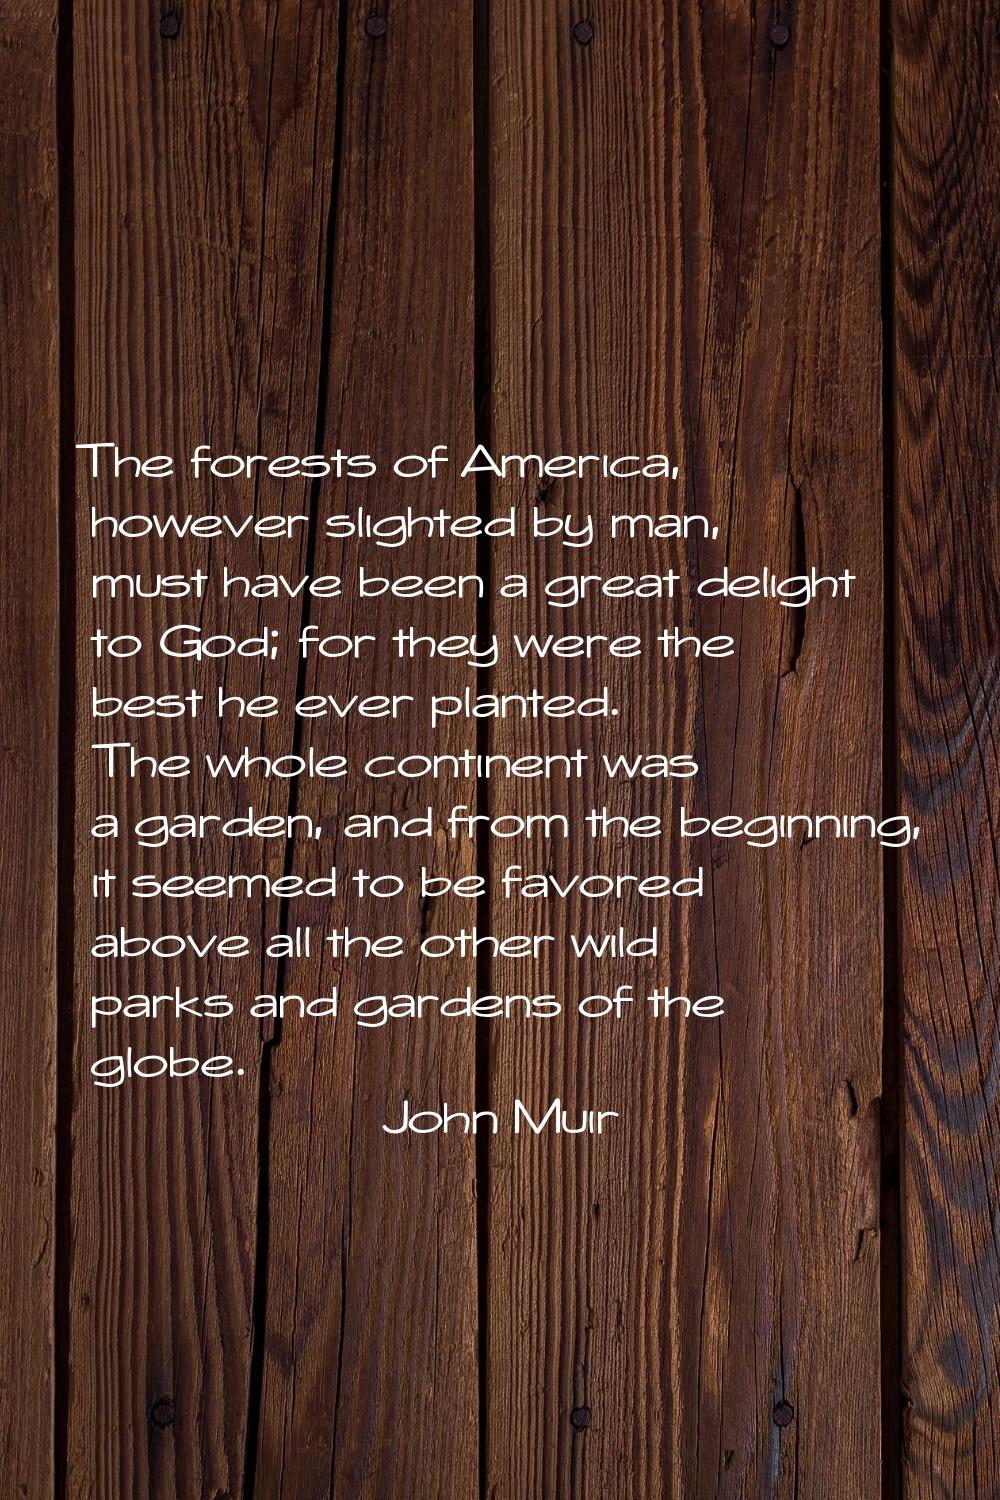 The forests of America, however slighted by man, must have been a great delight to God; for they we